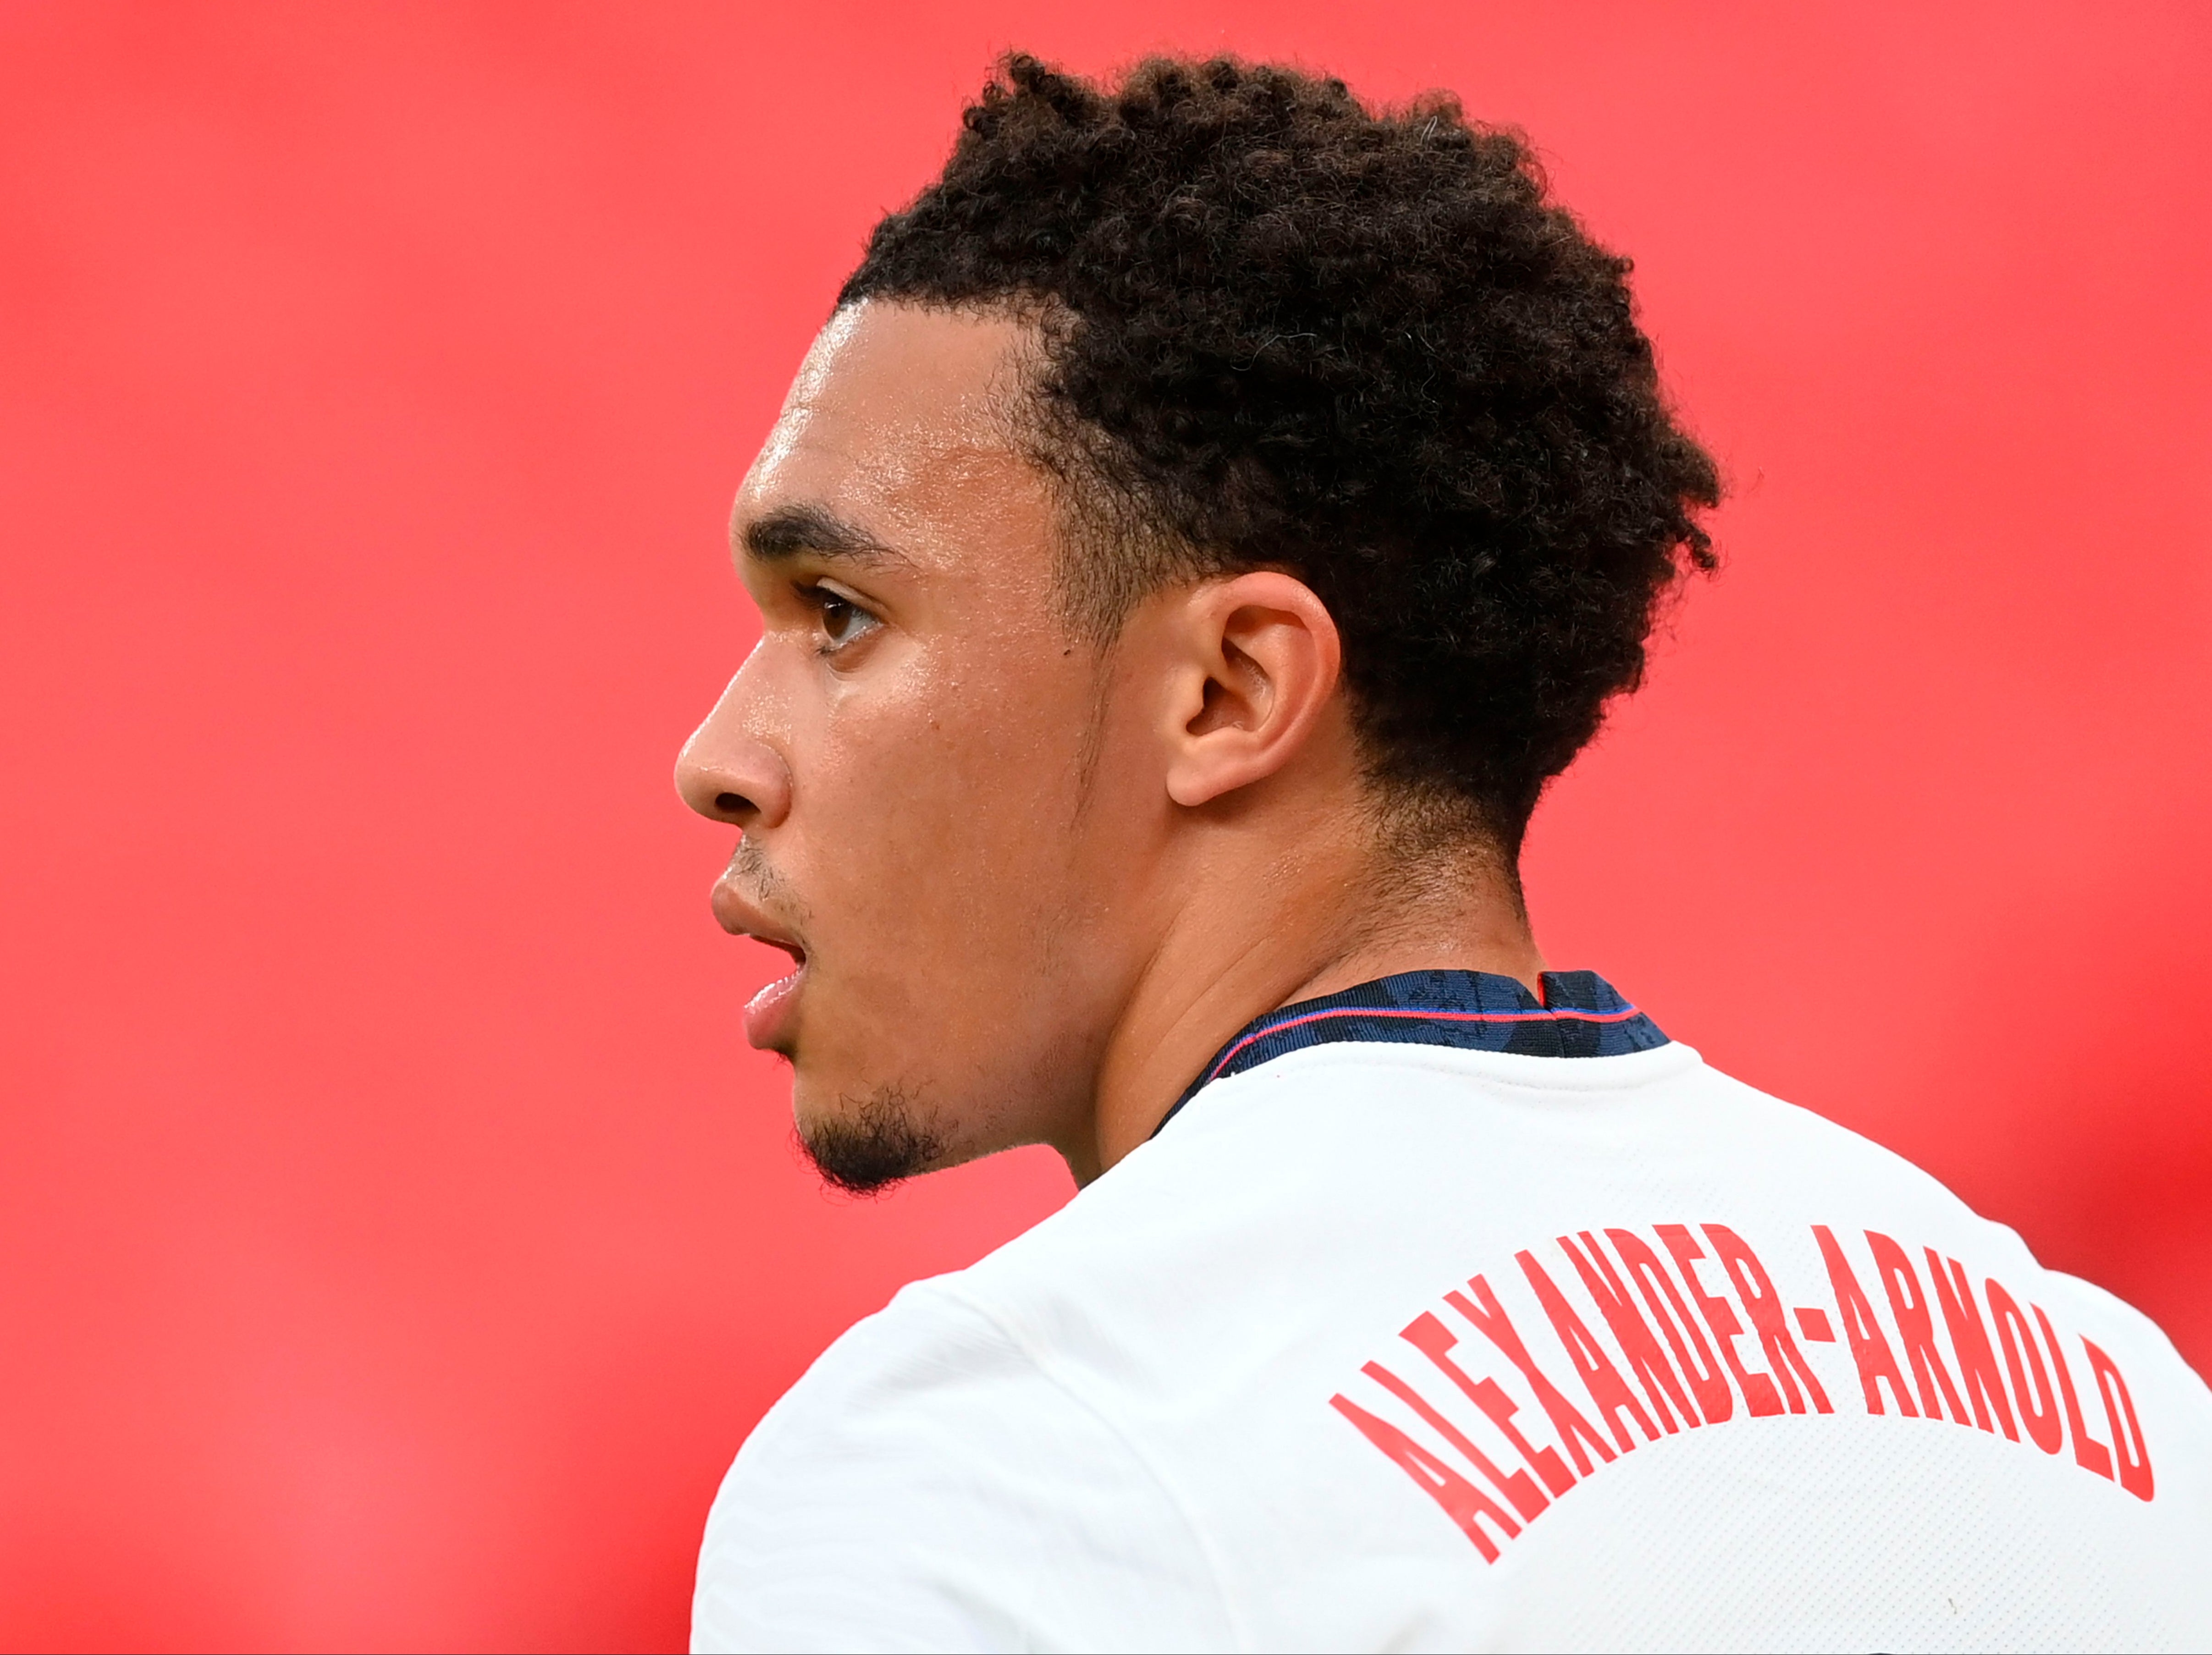 Trent Alexander-Arnold has been dropped by England coach Gareth Southgate